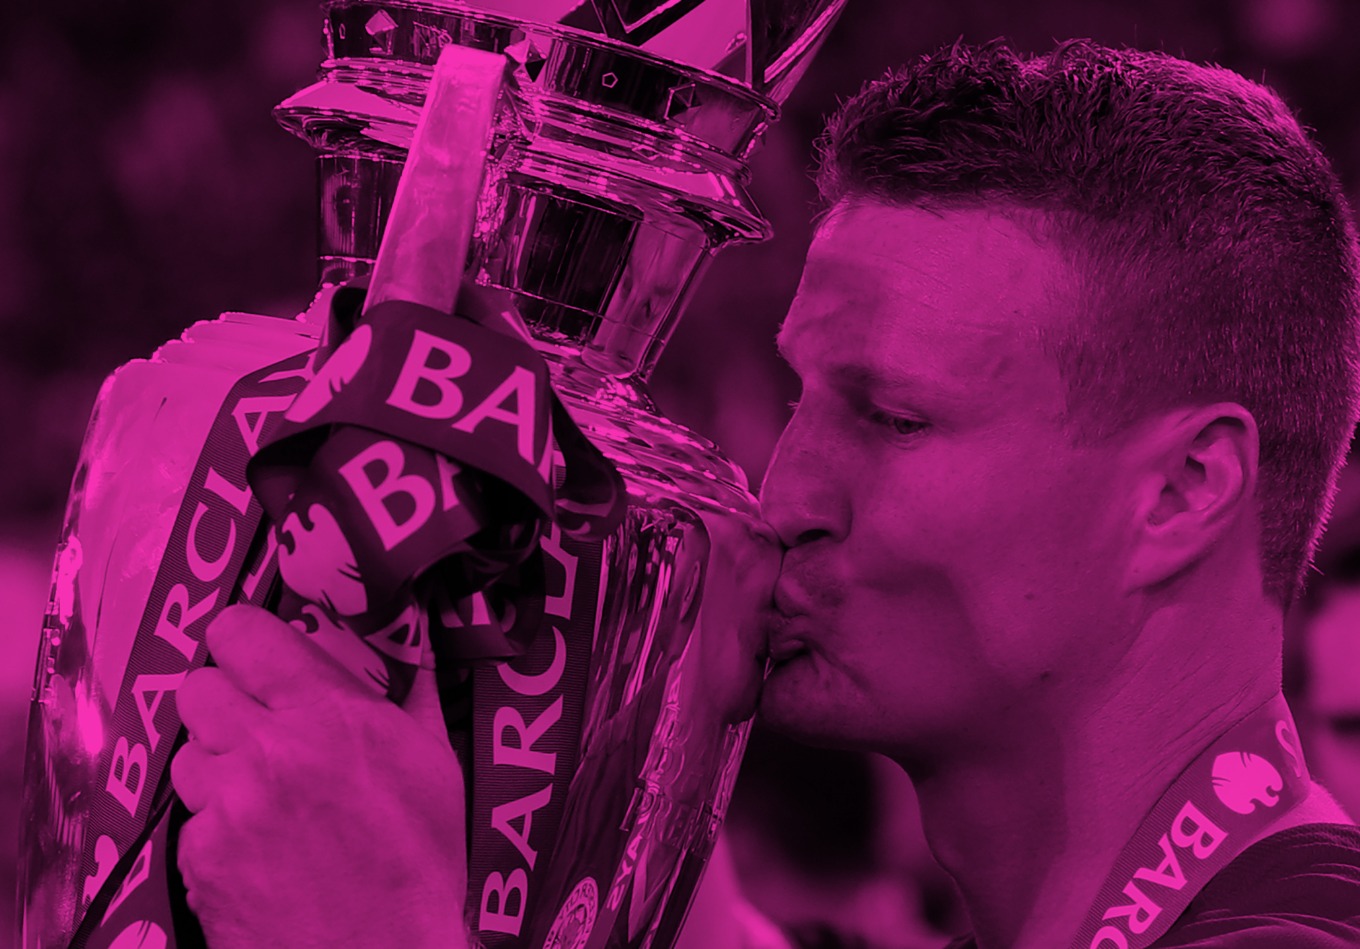 You Cannot Handle the Huth: A Conversation With a Premier League Winner